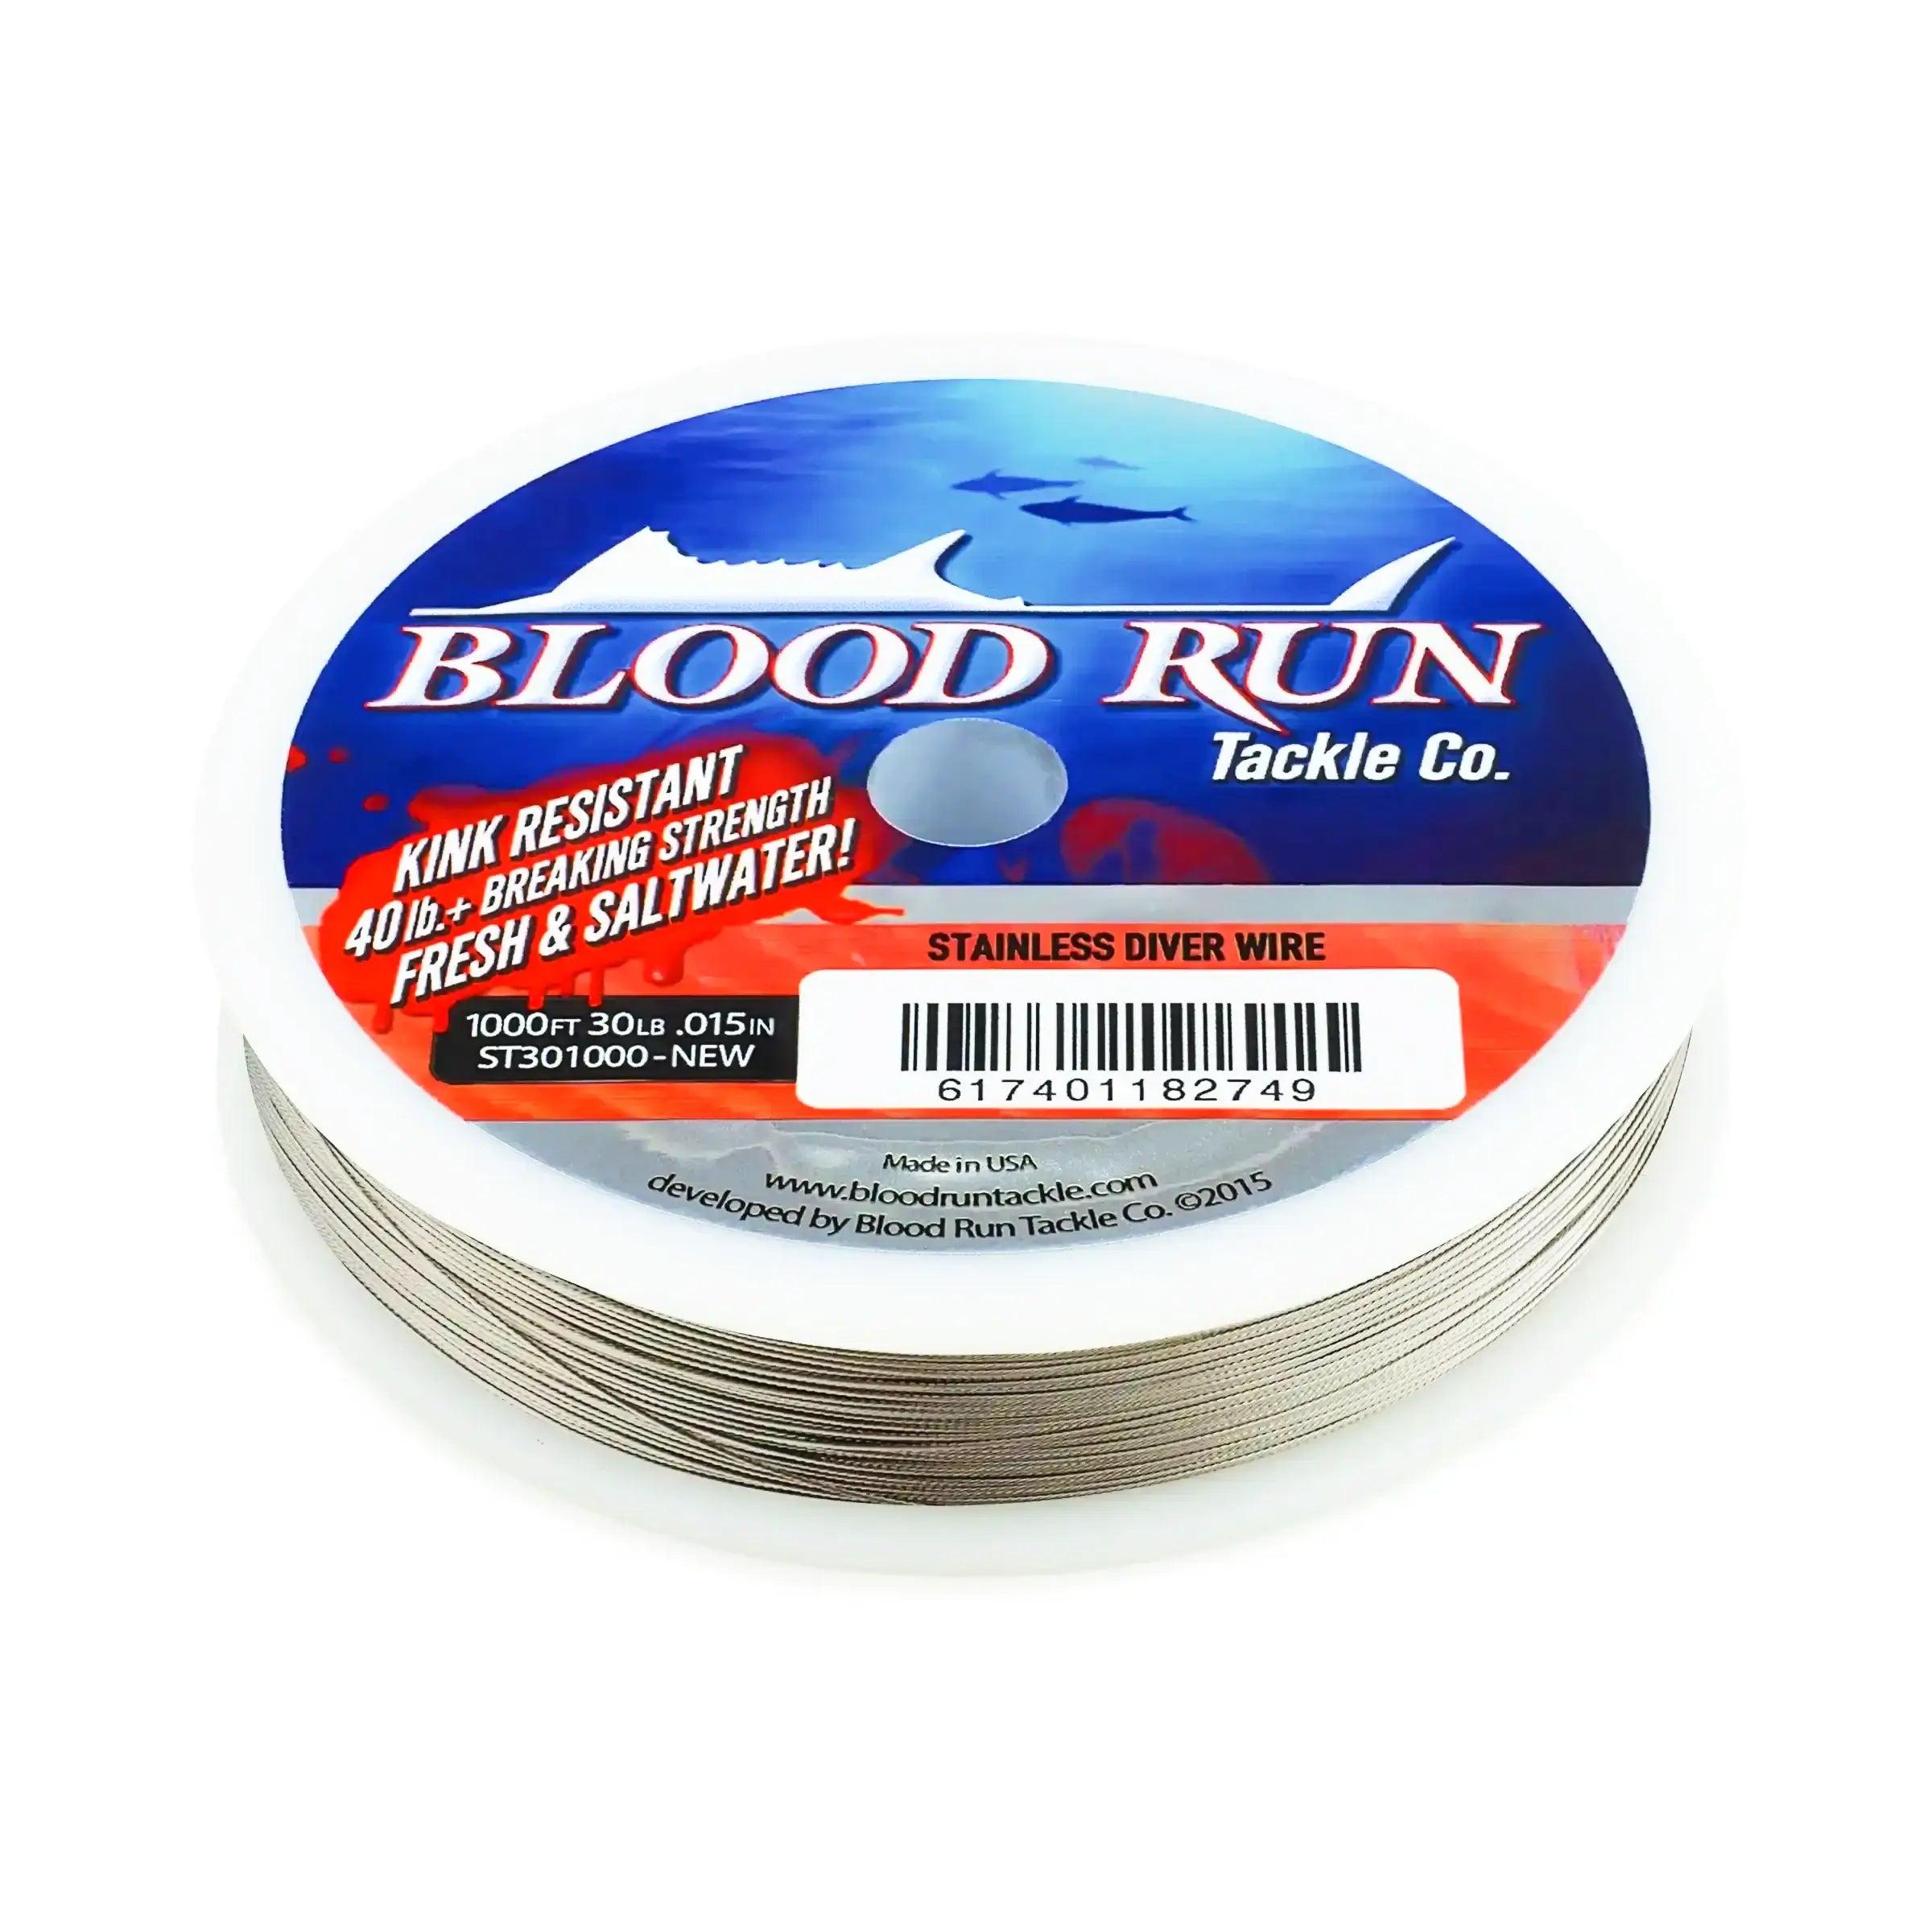 30LB Stainless Fishing Wire for Dipsey Divers 1000' Blood Run Fishing